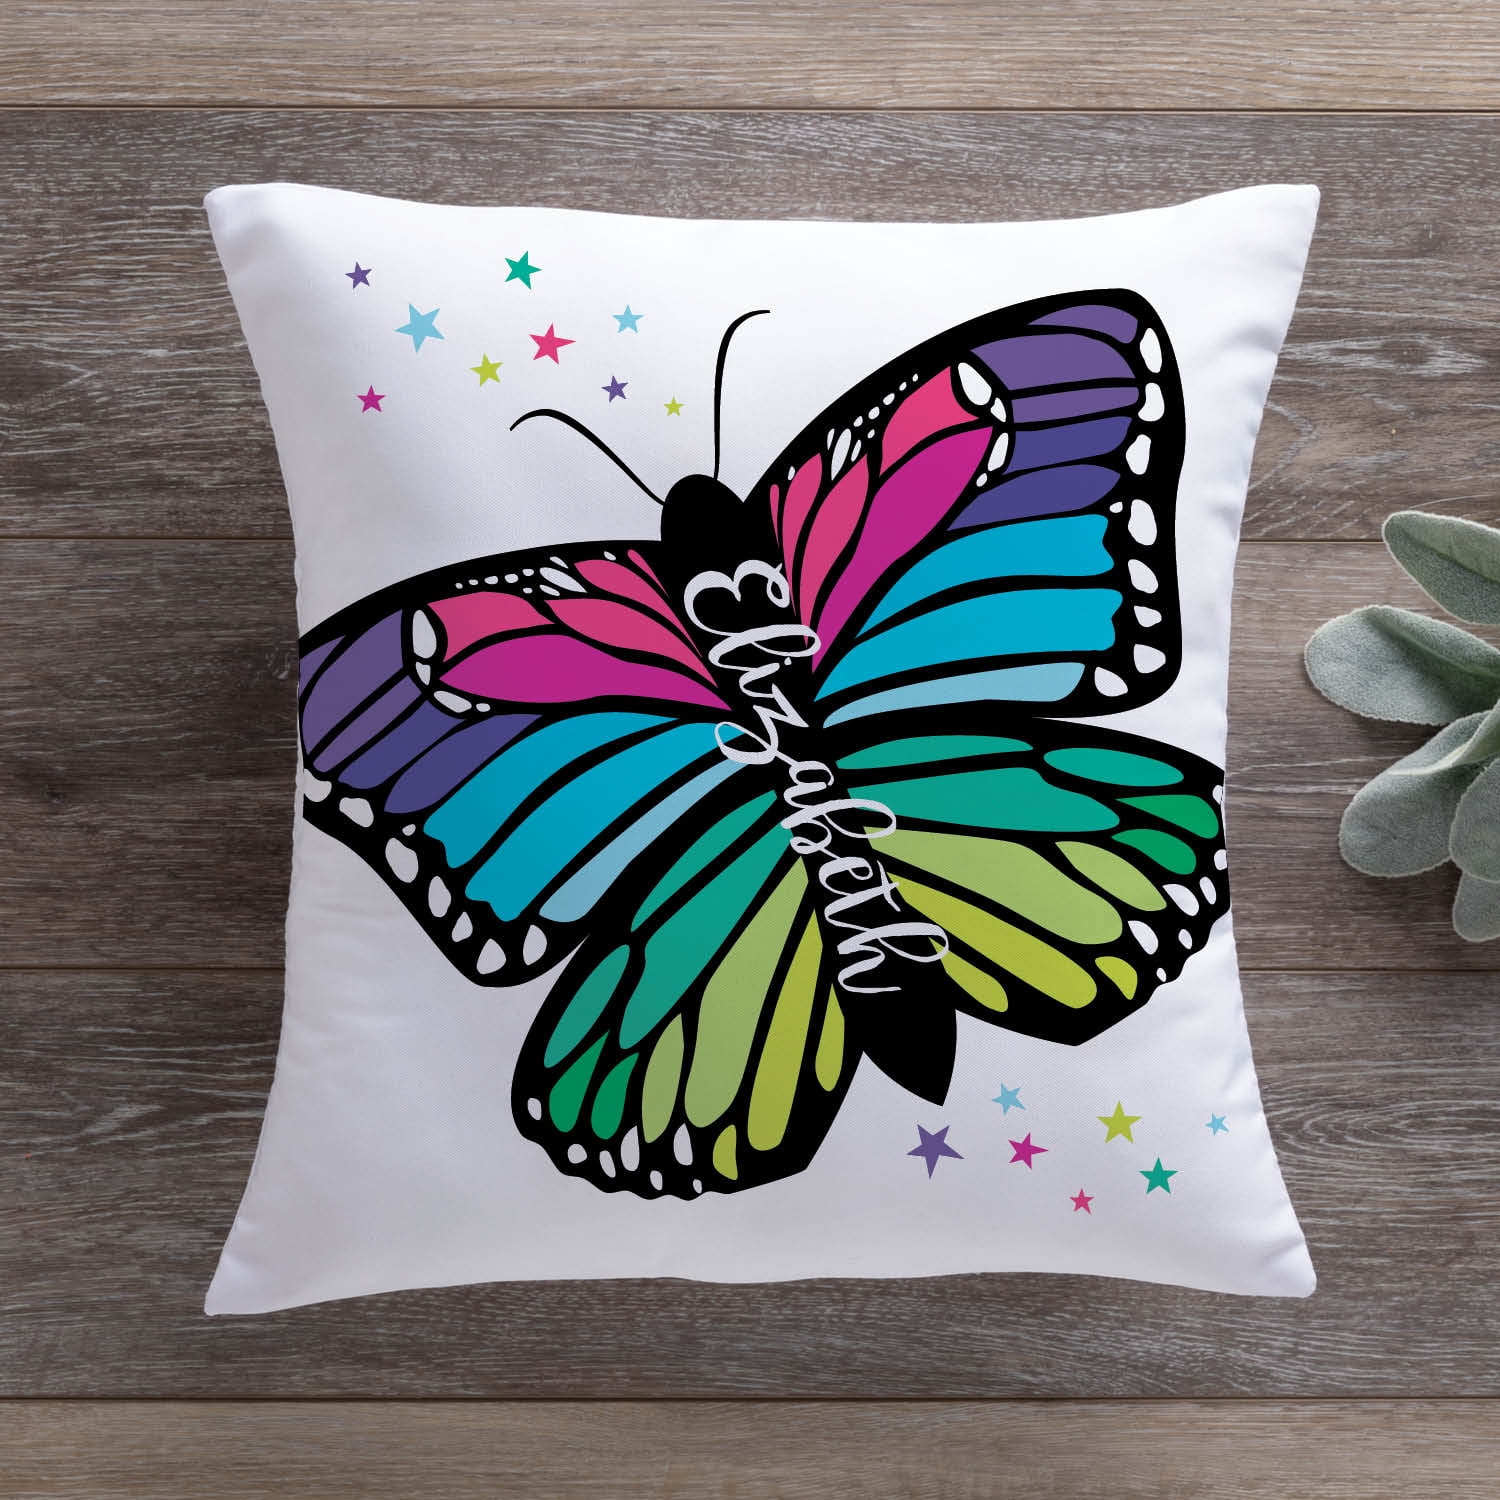 PILLOWS 18" SQUARE MULTICOLOR BUTTERFLY INDOOR OUTDOOR PILLOW 